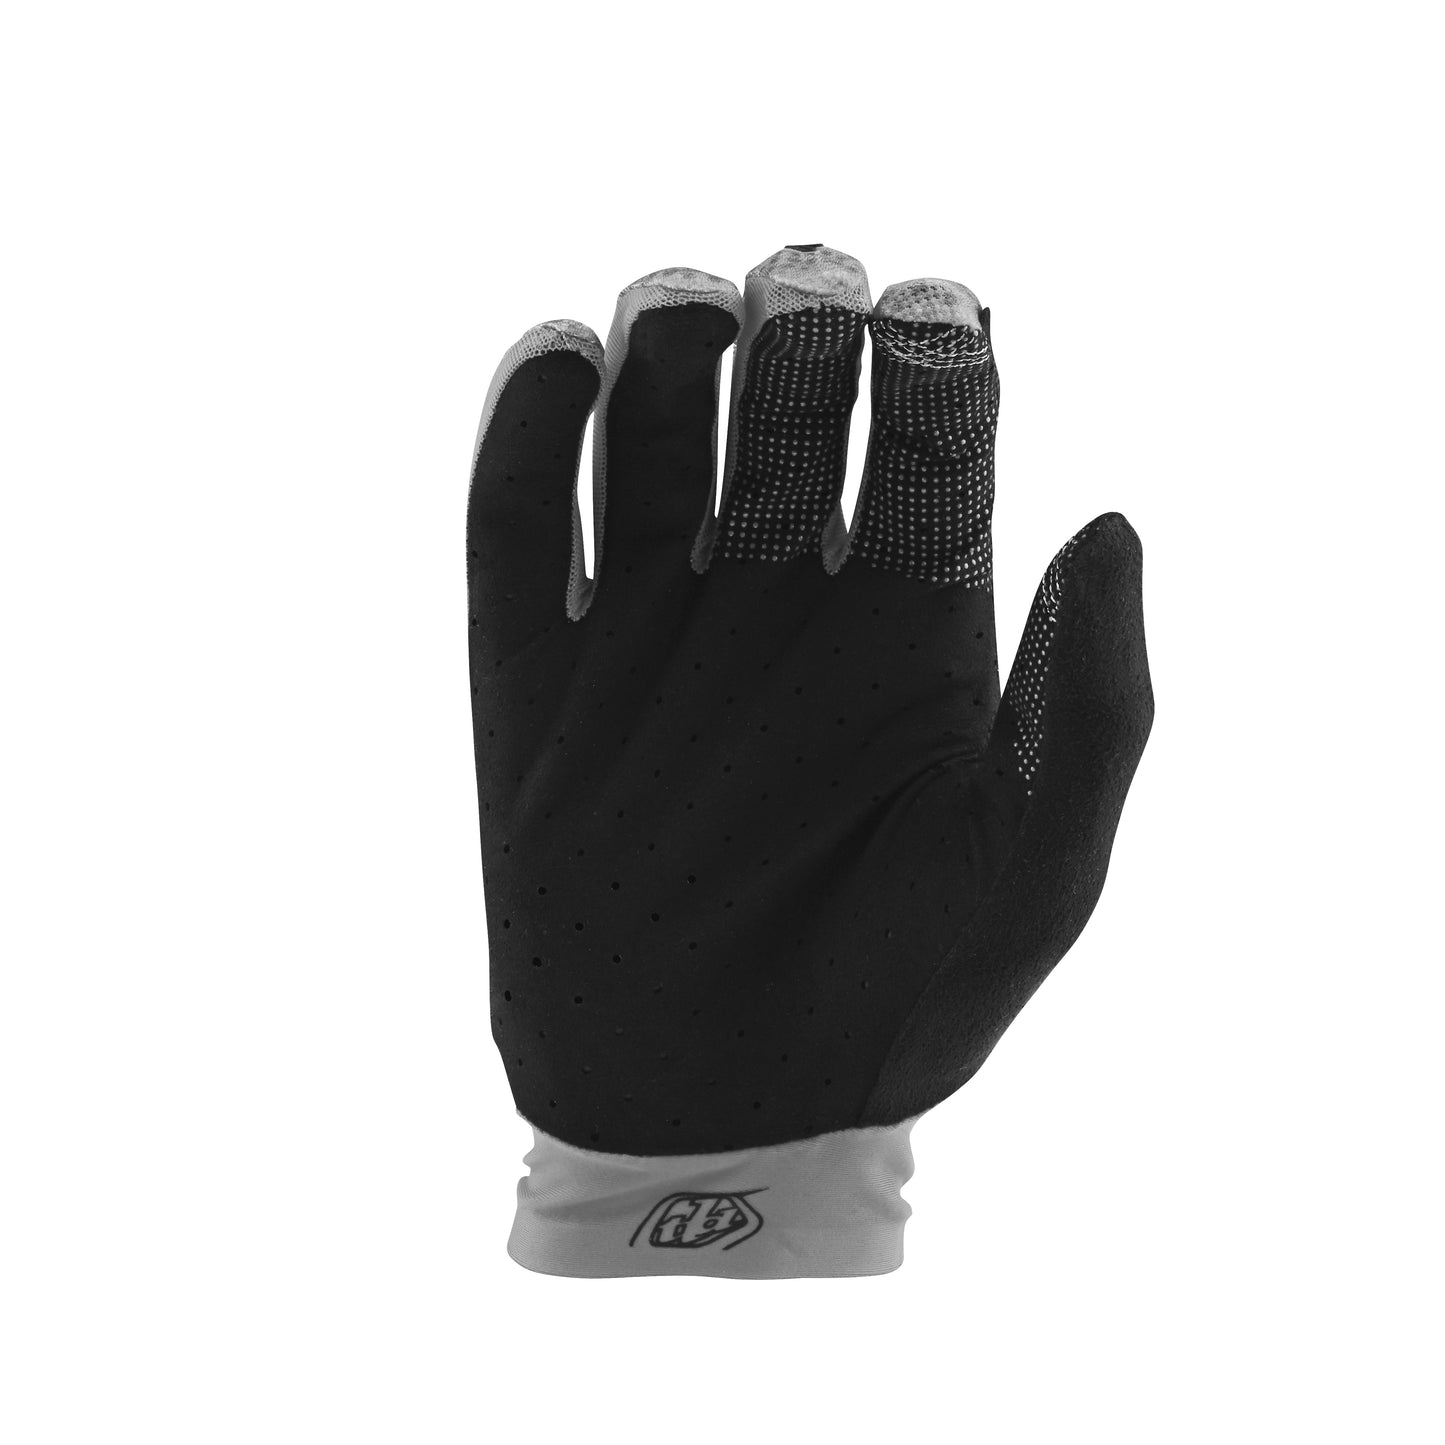 Ace Glove SRAM Shifted Ciment